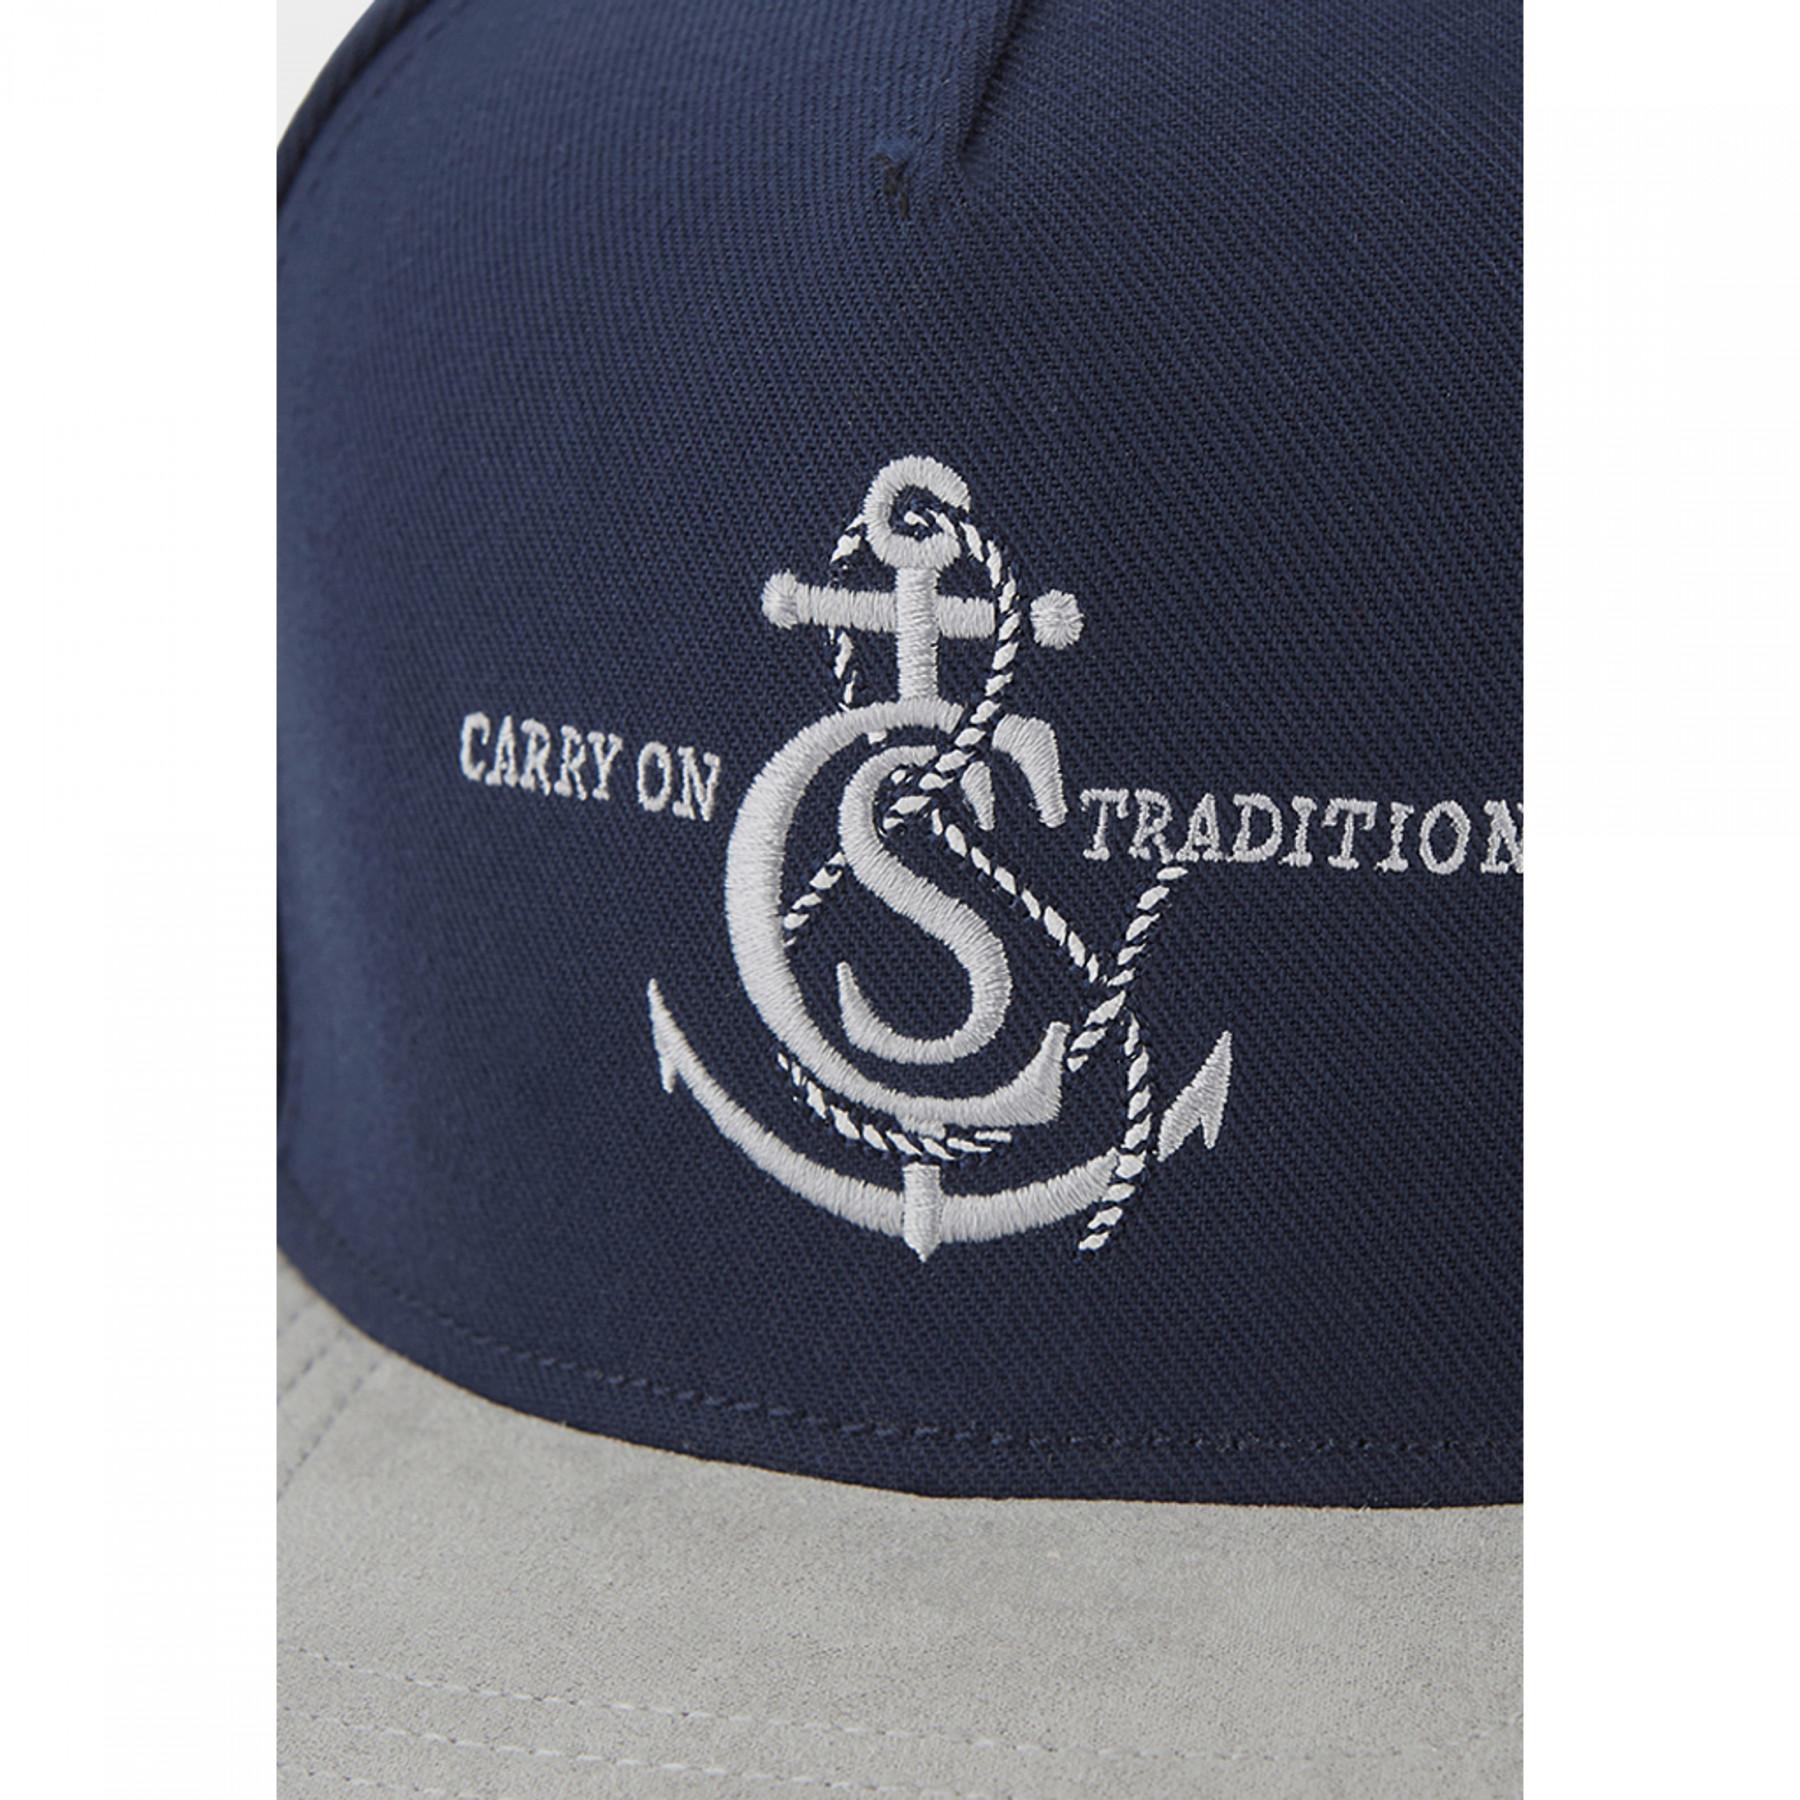 Kapsyl Cayler & Sons cl tradition